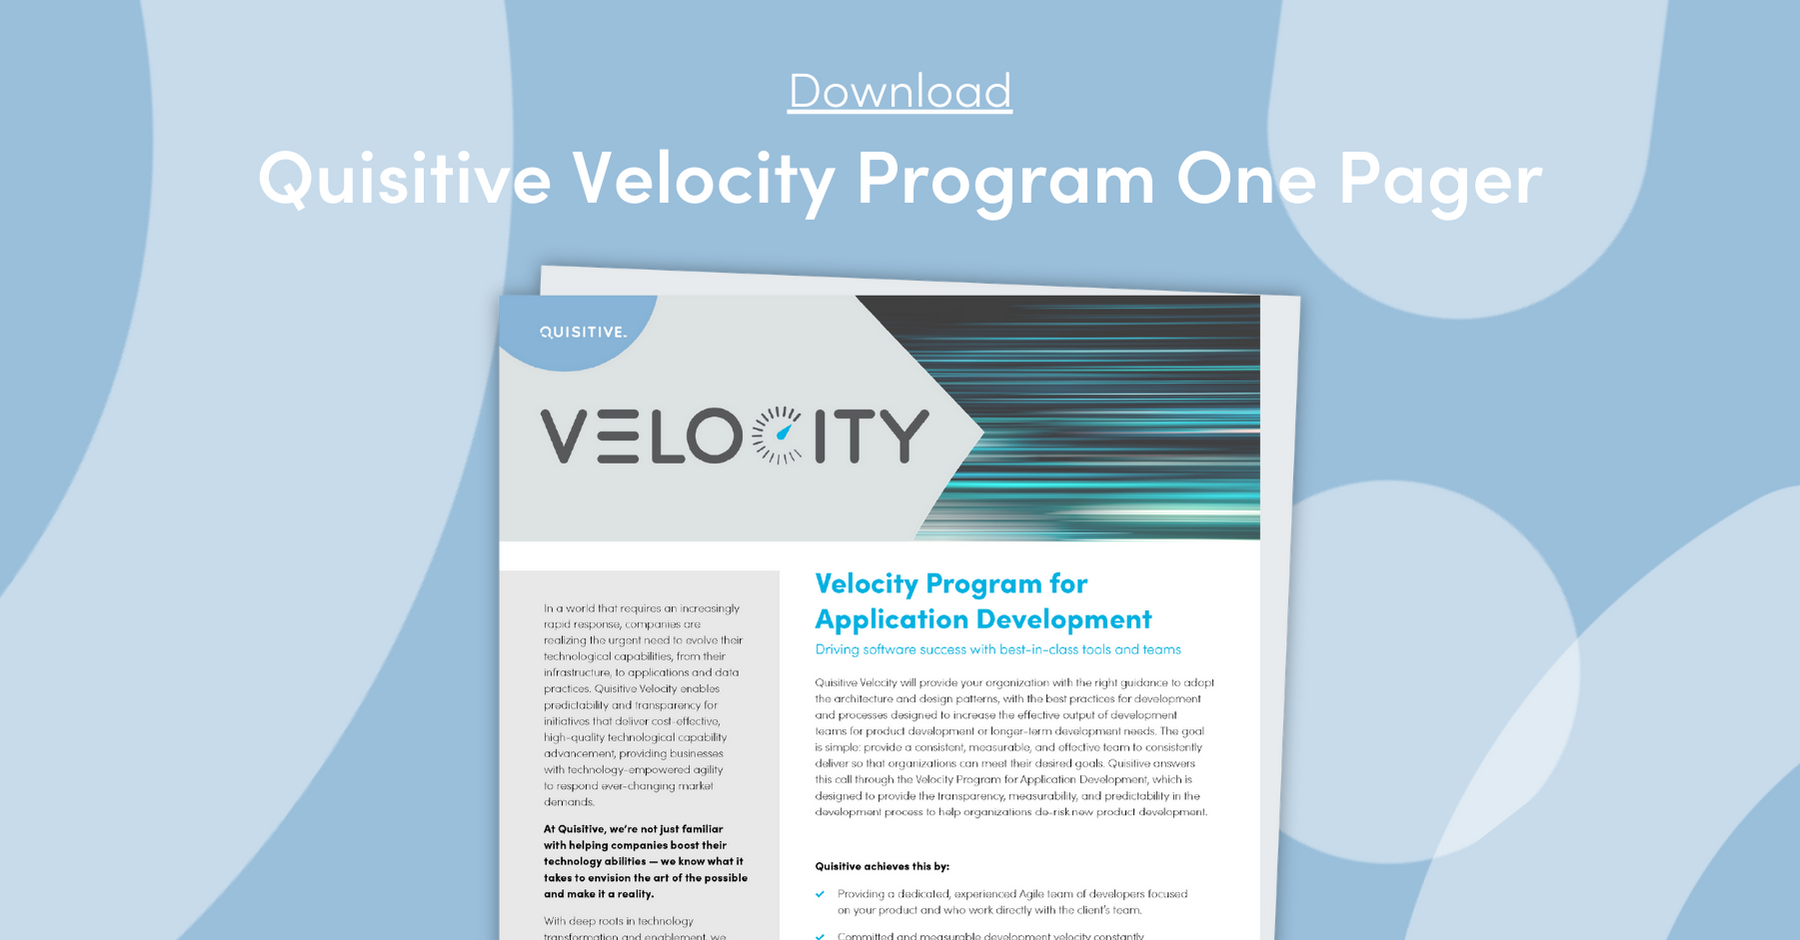 Quisitive Velocity Program One Pager Feature Image